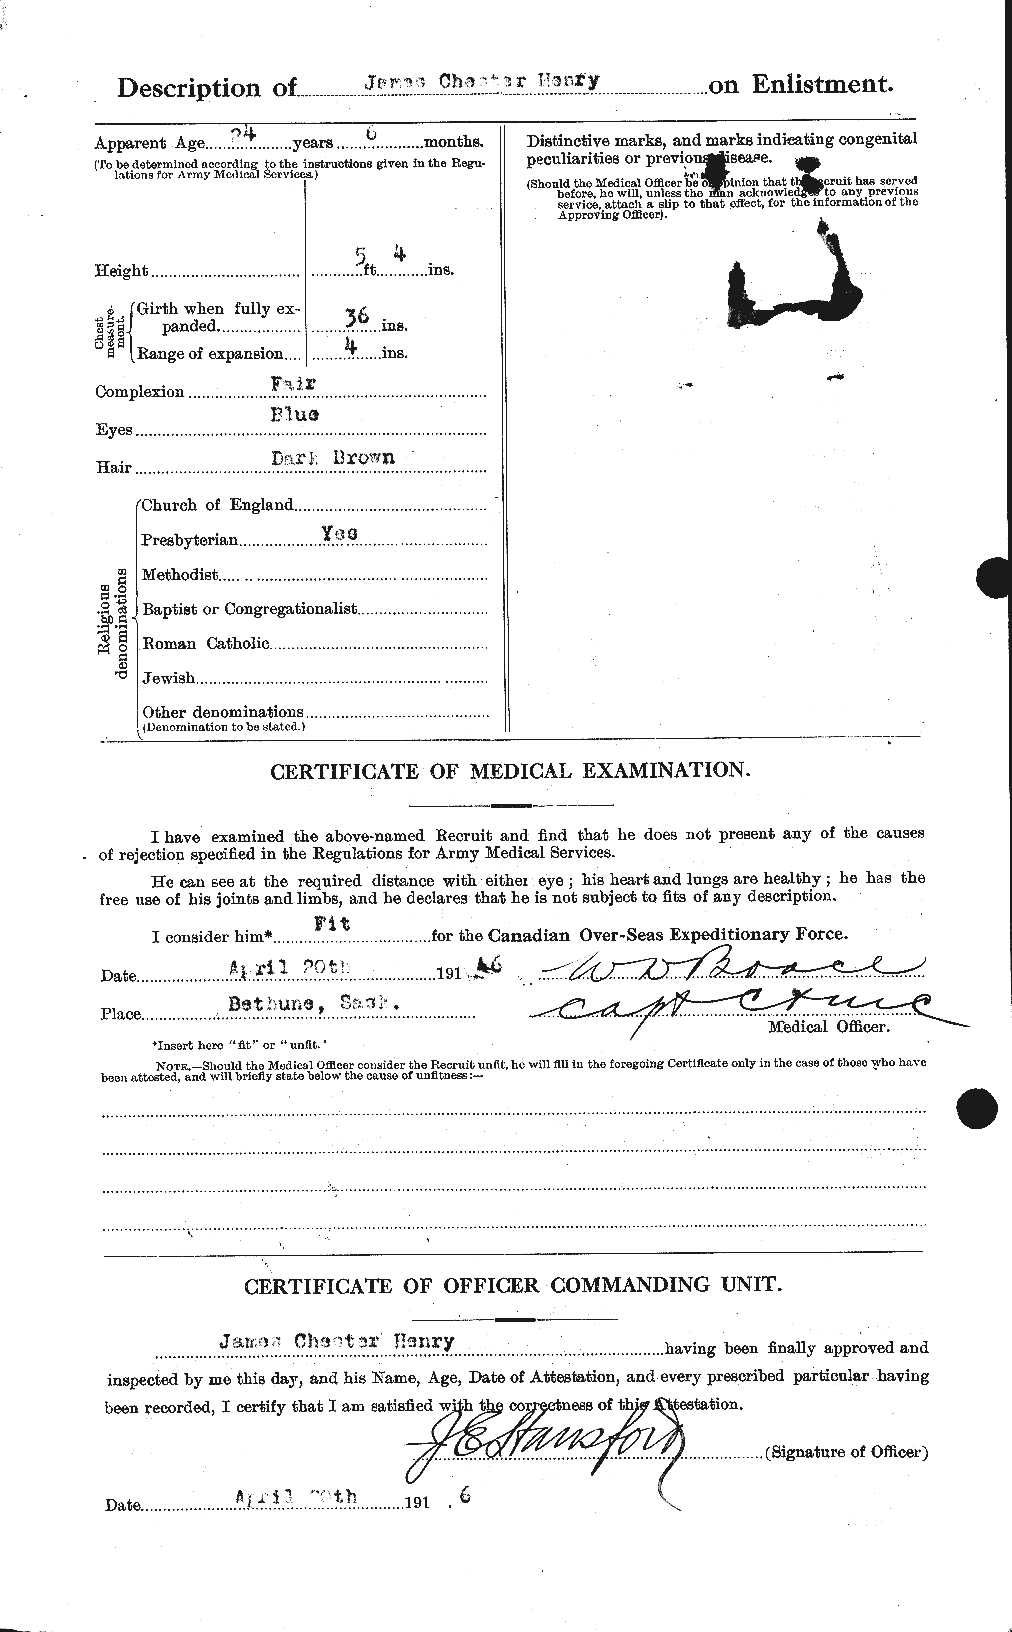 Personnel Records of the First World War - CEF 387594b